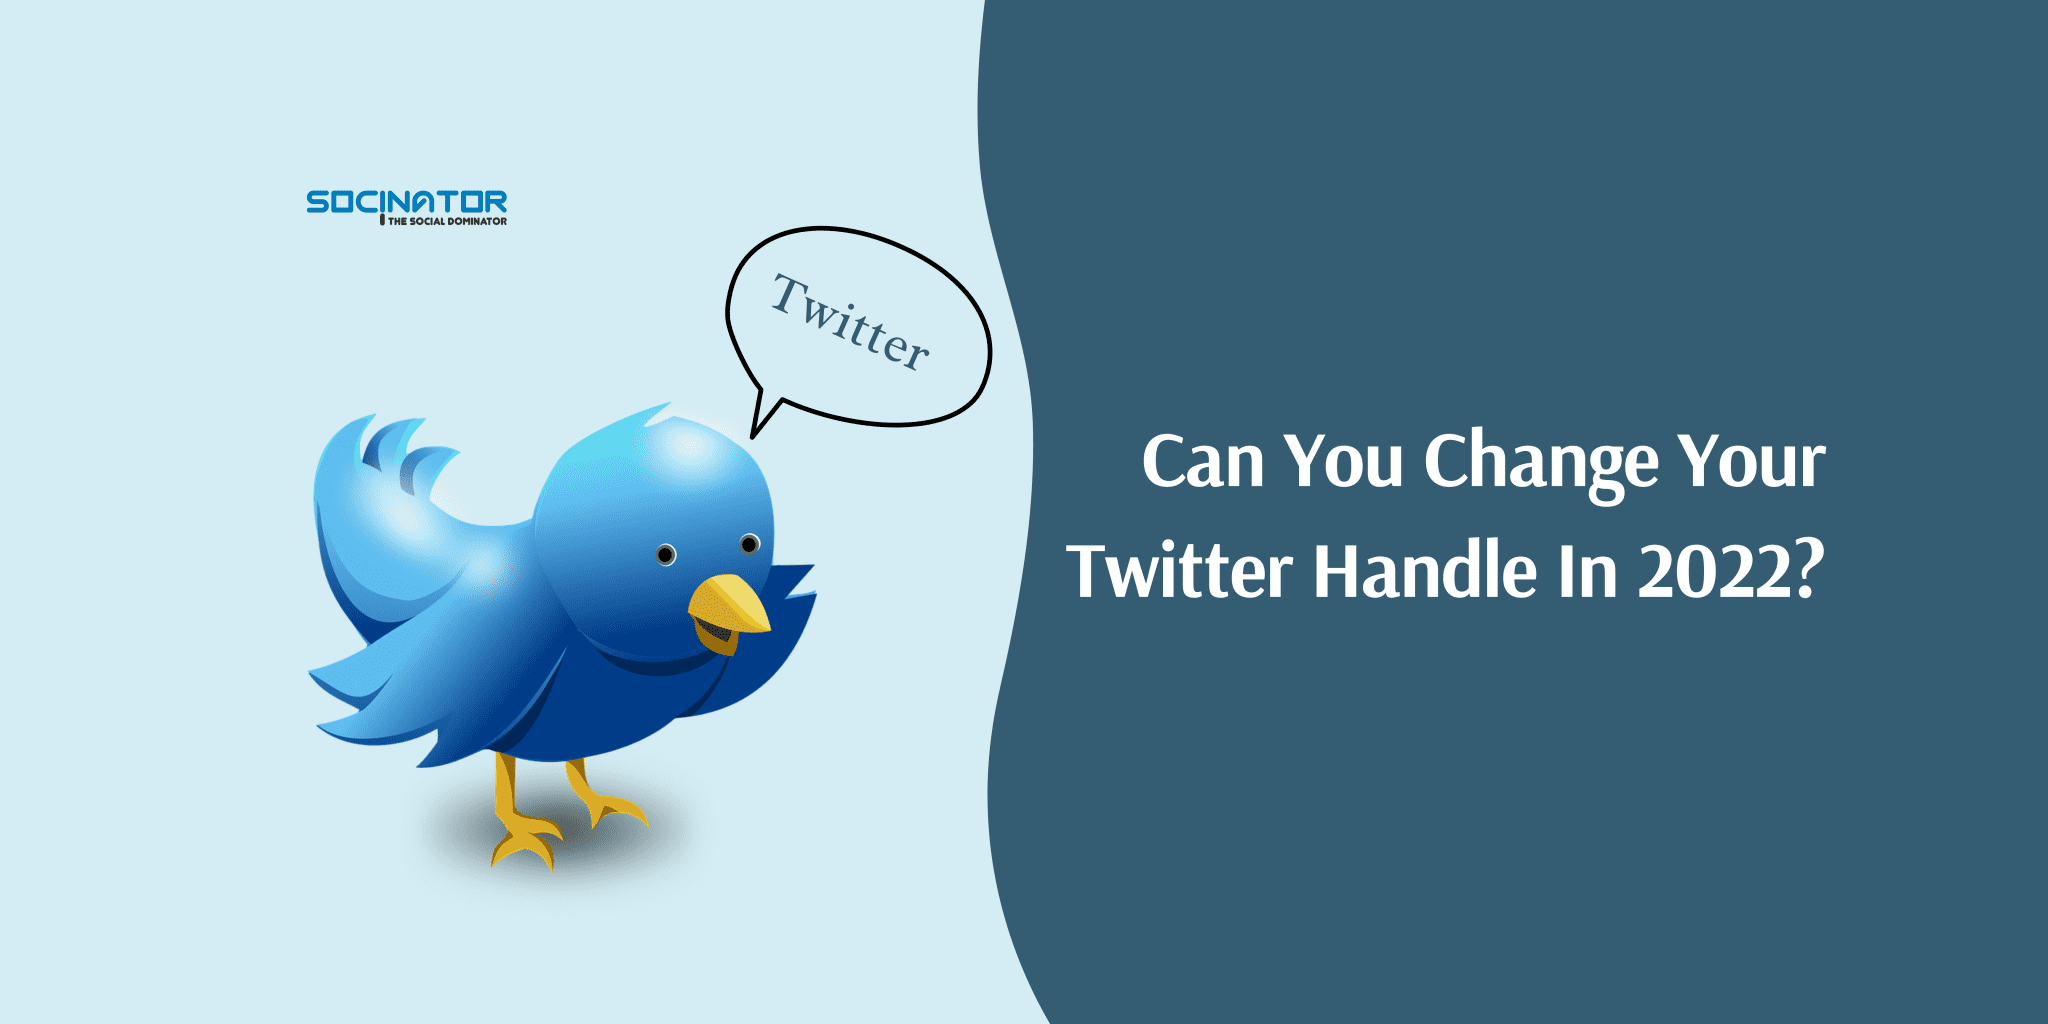 Can You Change Your Twitter Handle In 2022?